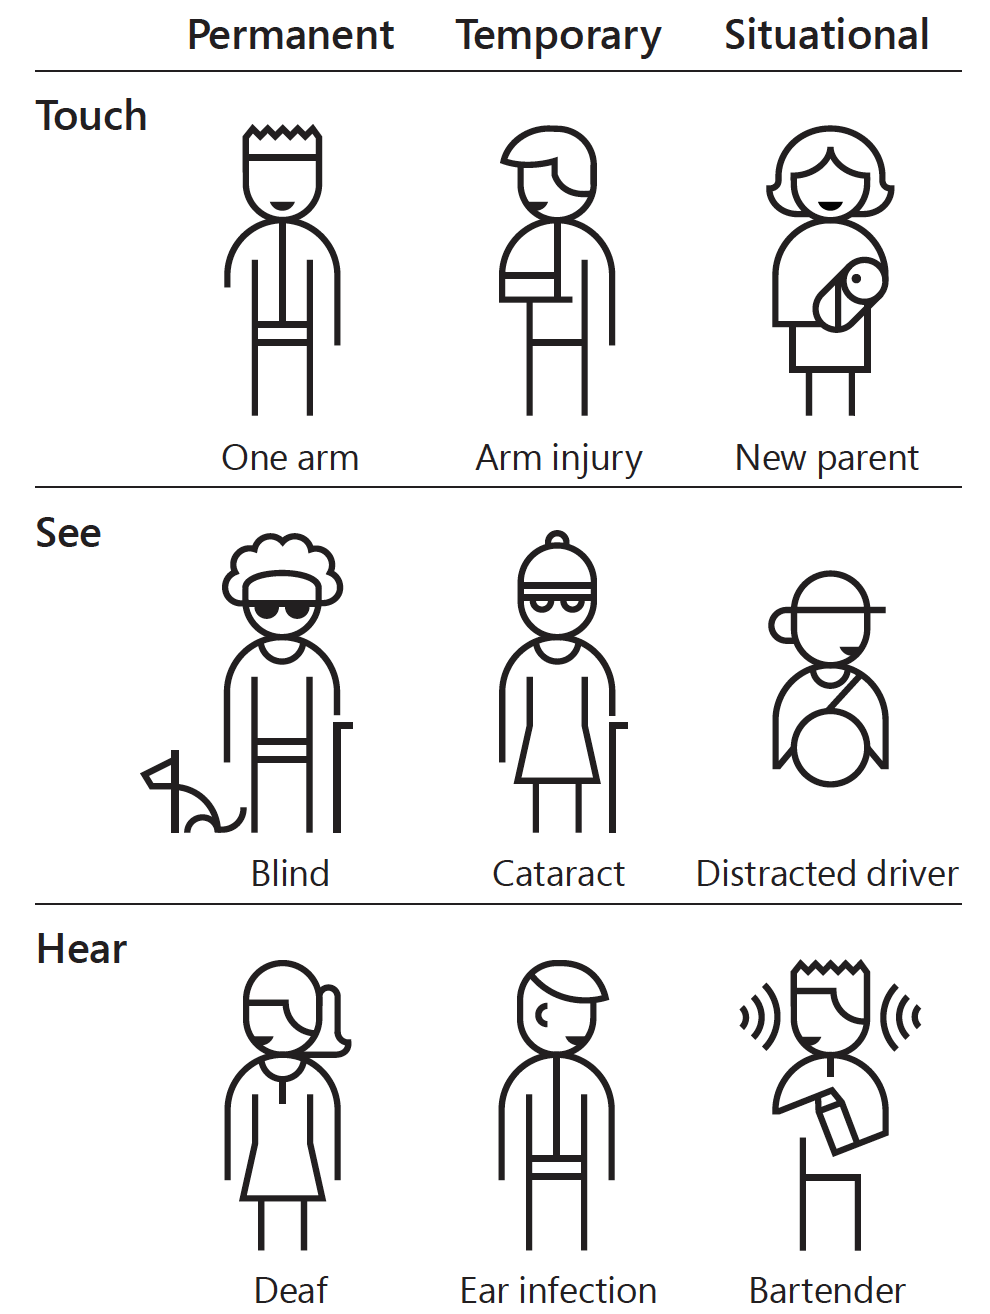 An illustration with different examples of permanent, temporary, and situational disabilities, from Microsoft’s Inclusive Design toolkit.